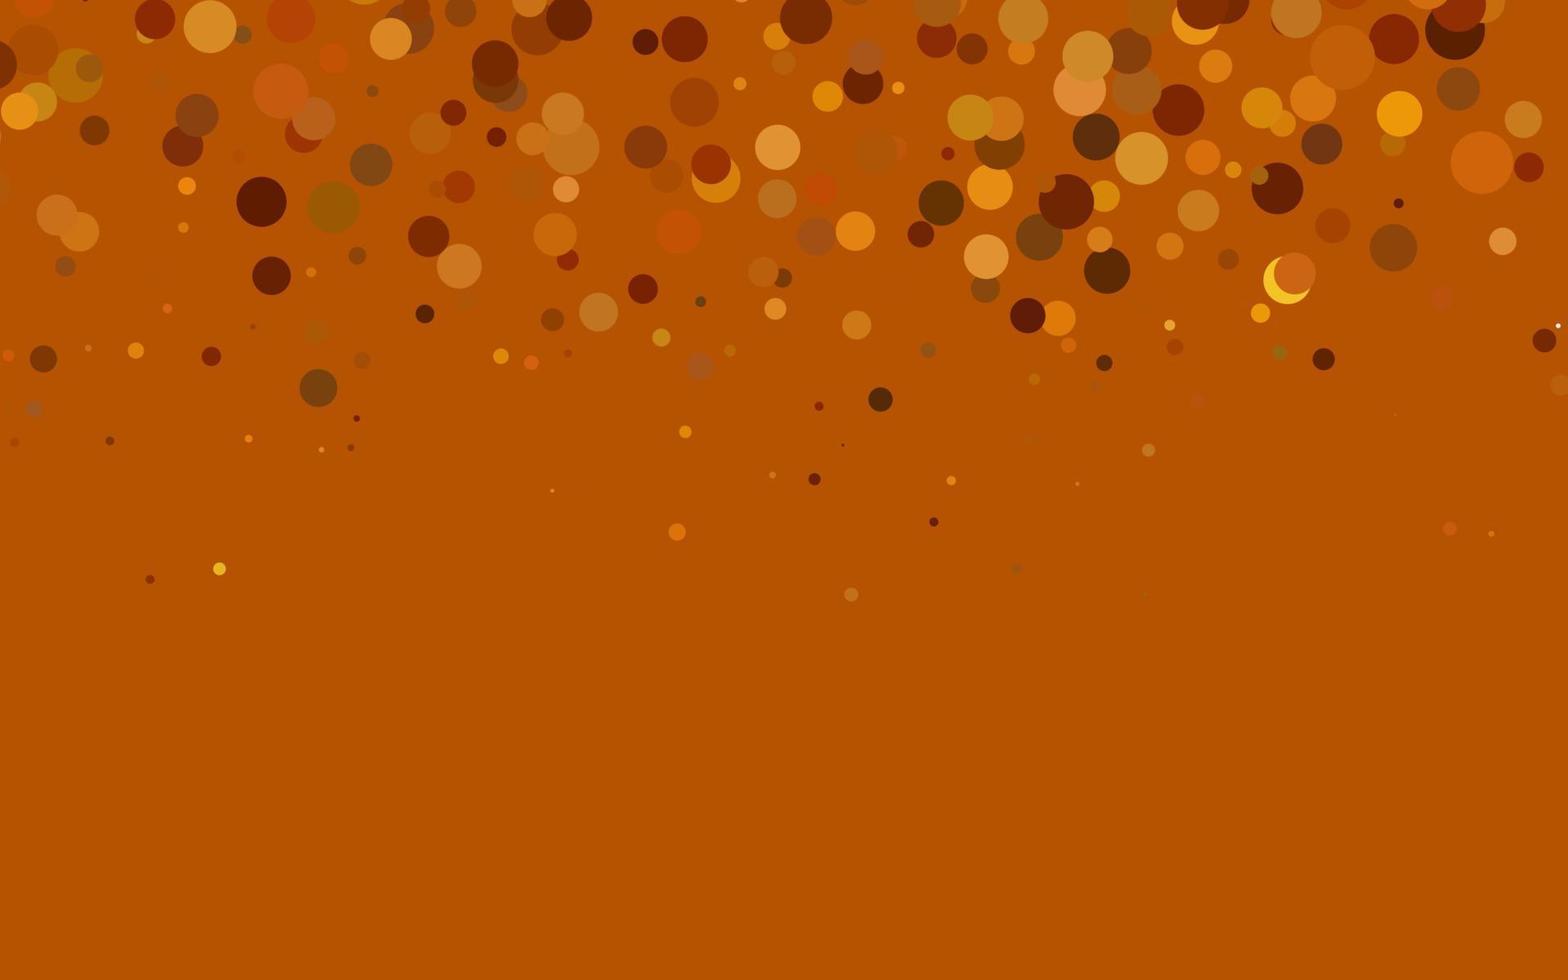 Light Orange vector layout with circle spots.